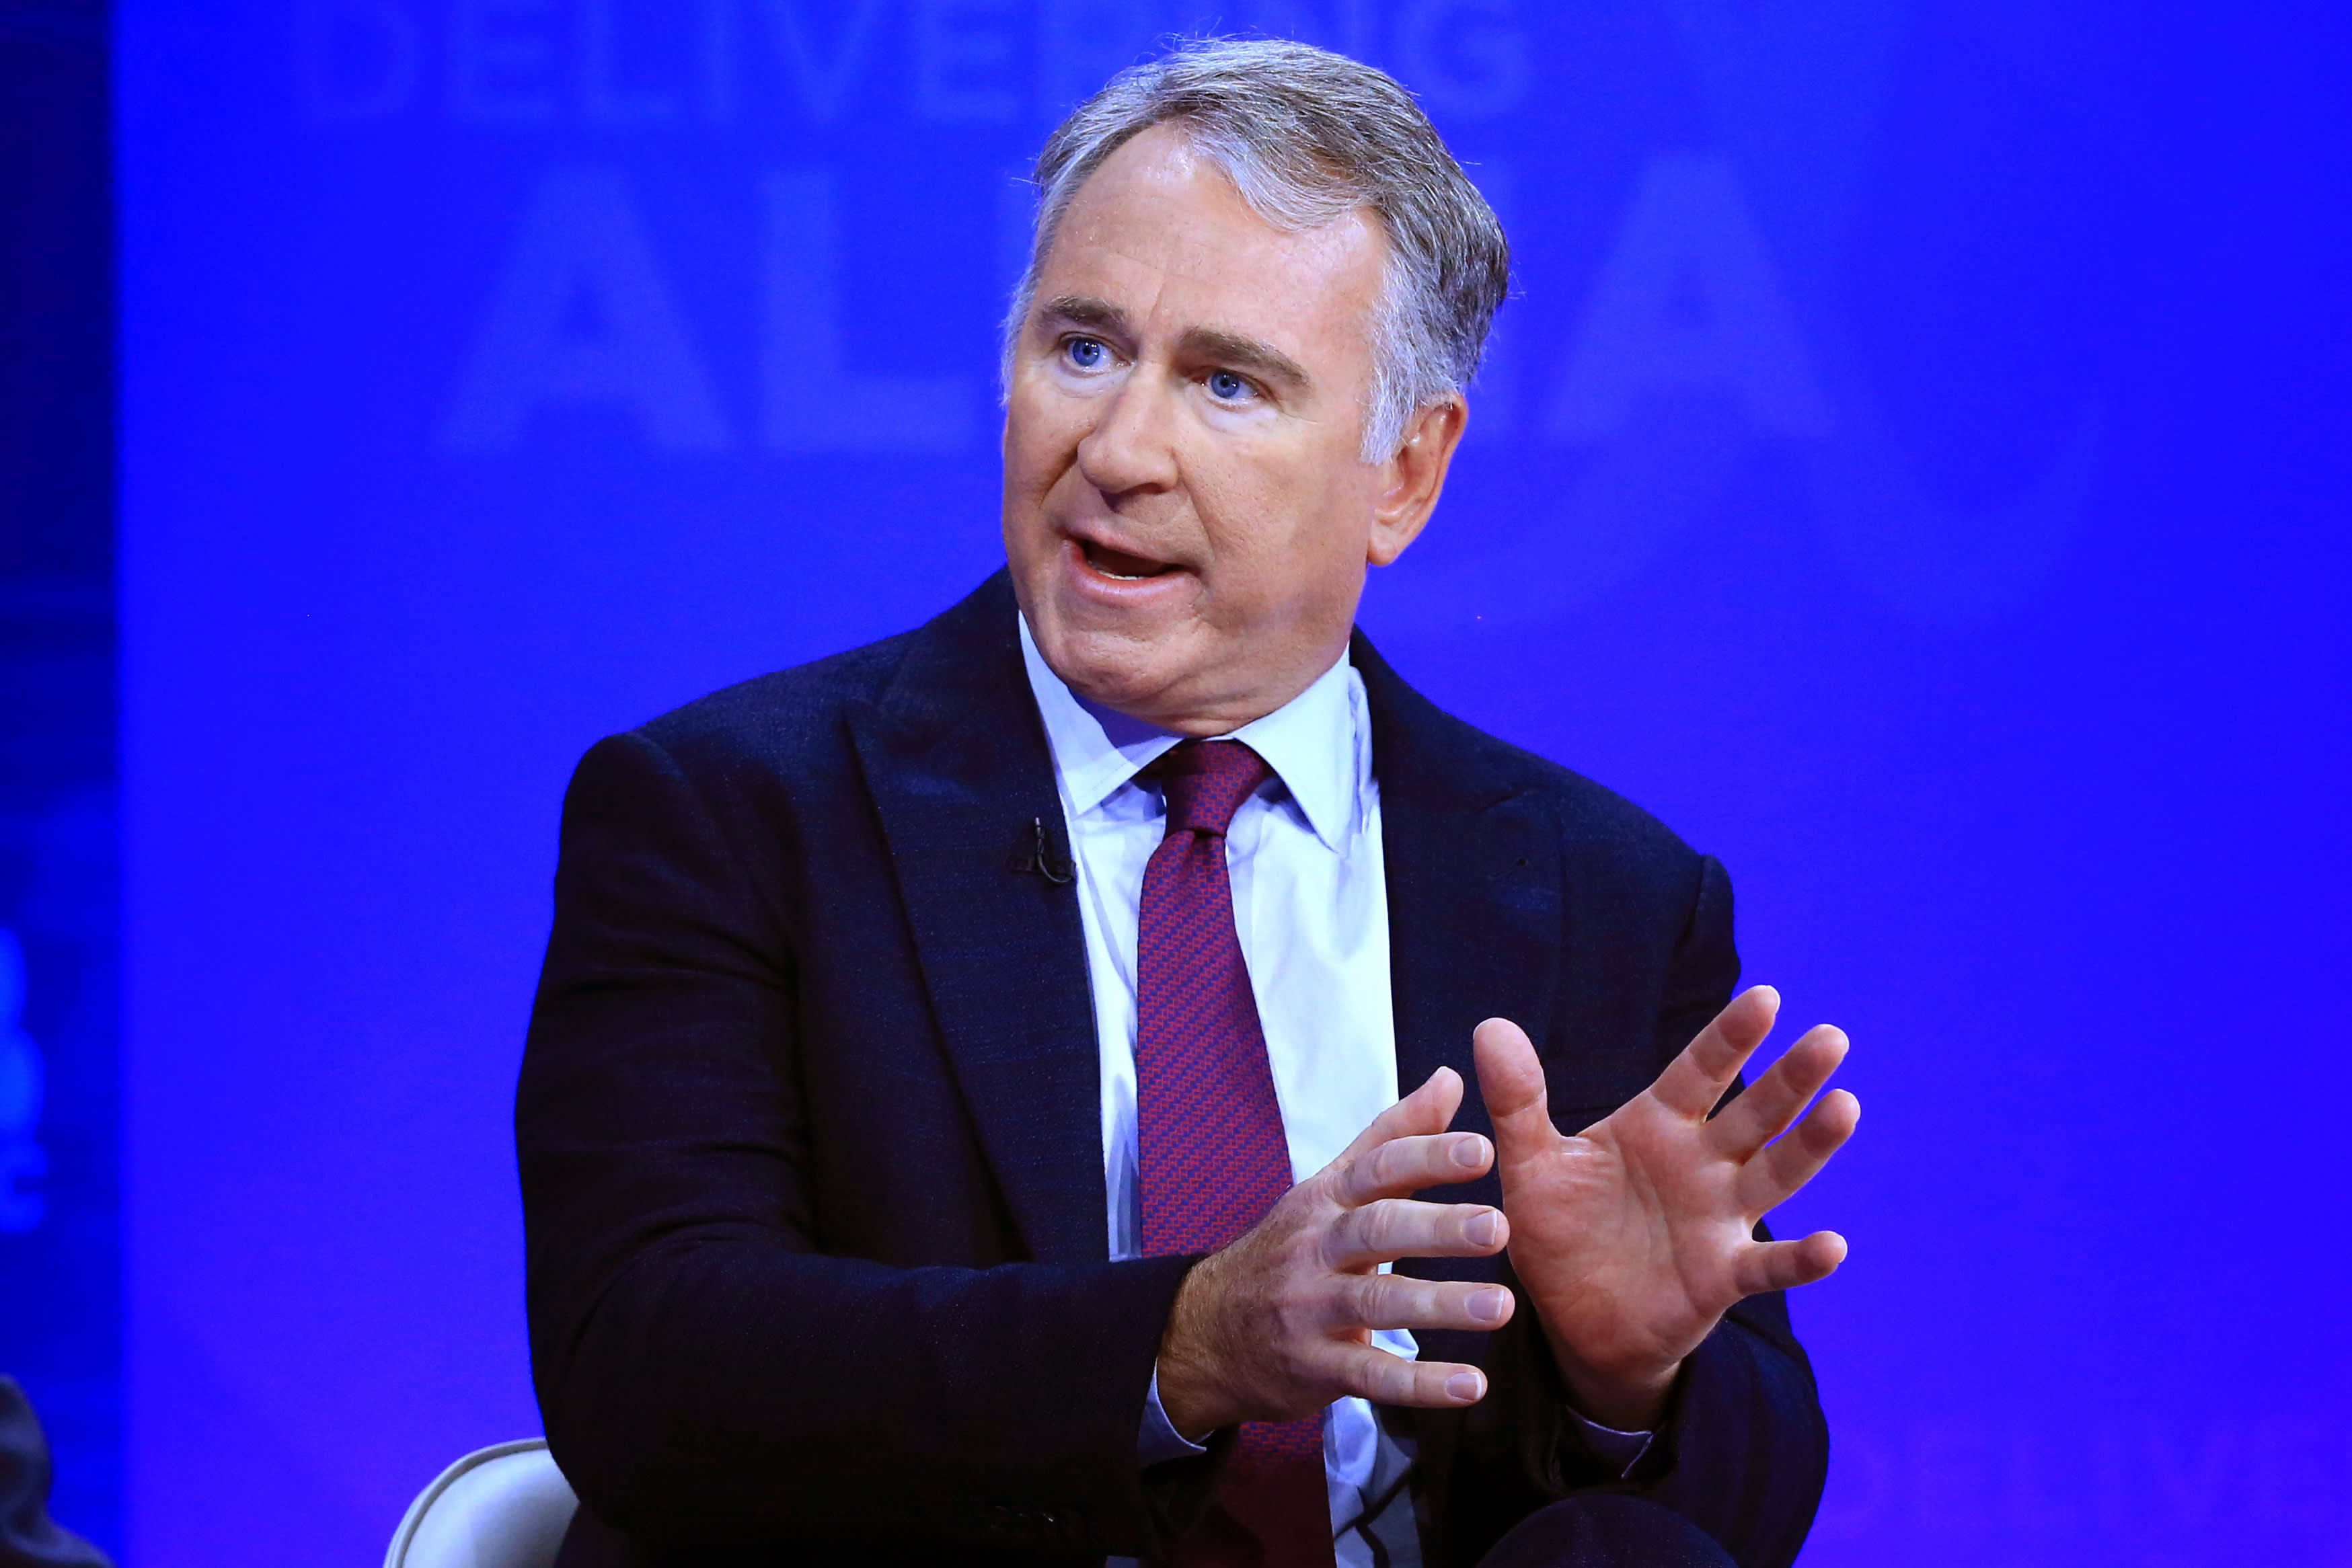 Ken Griffin's hedge fund Citadel is taking a 5% stake in Western Alliance Bancorp amid the banking crisis